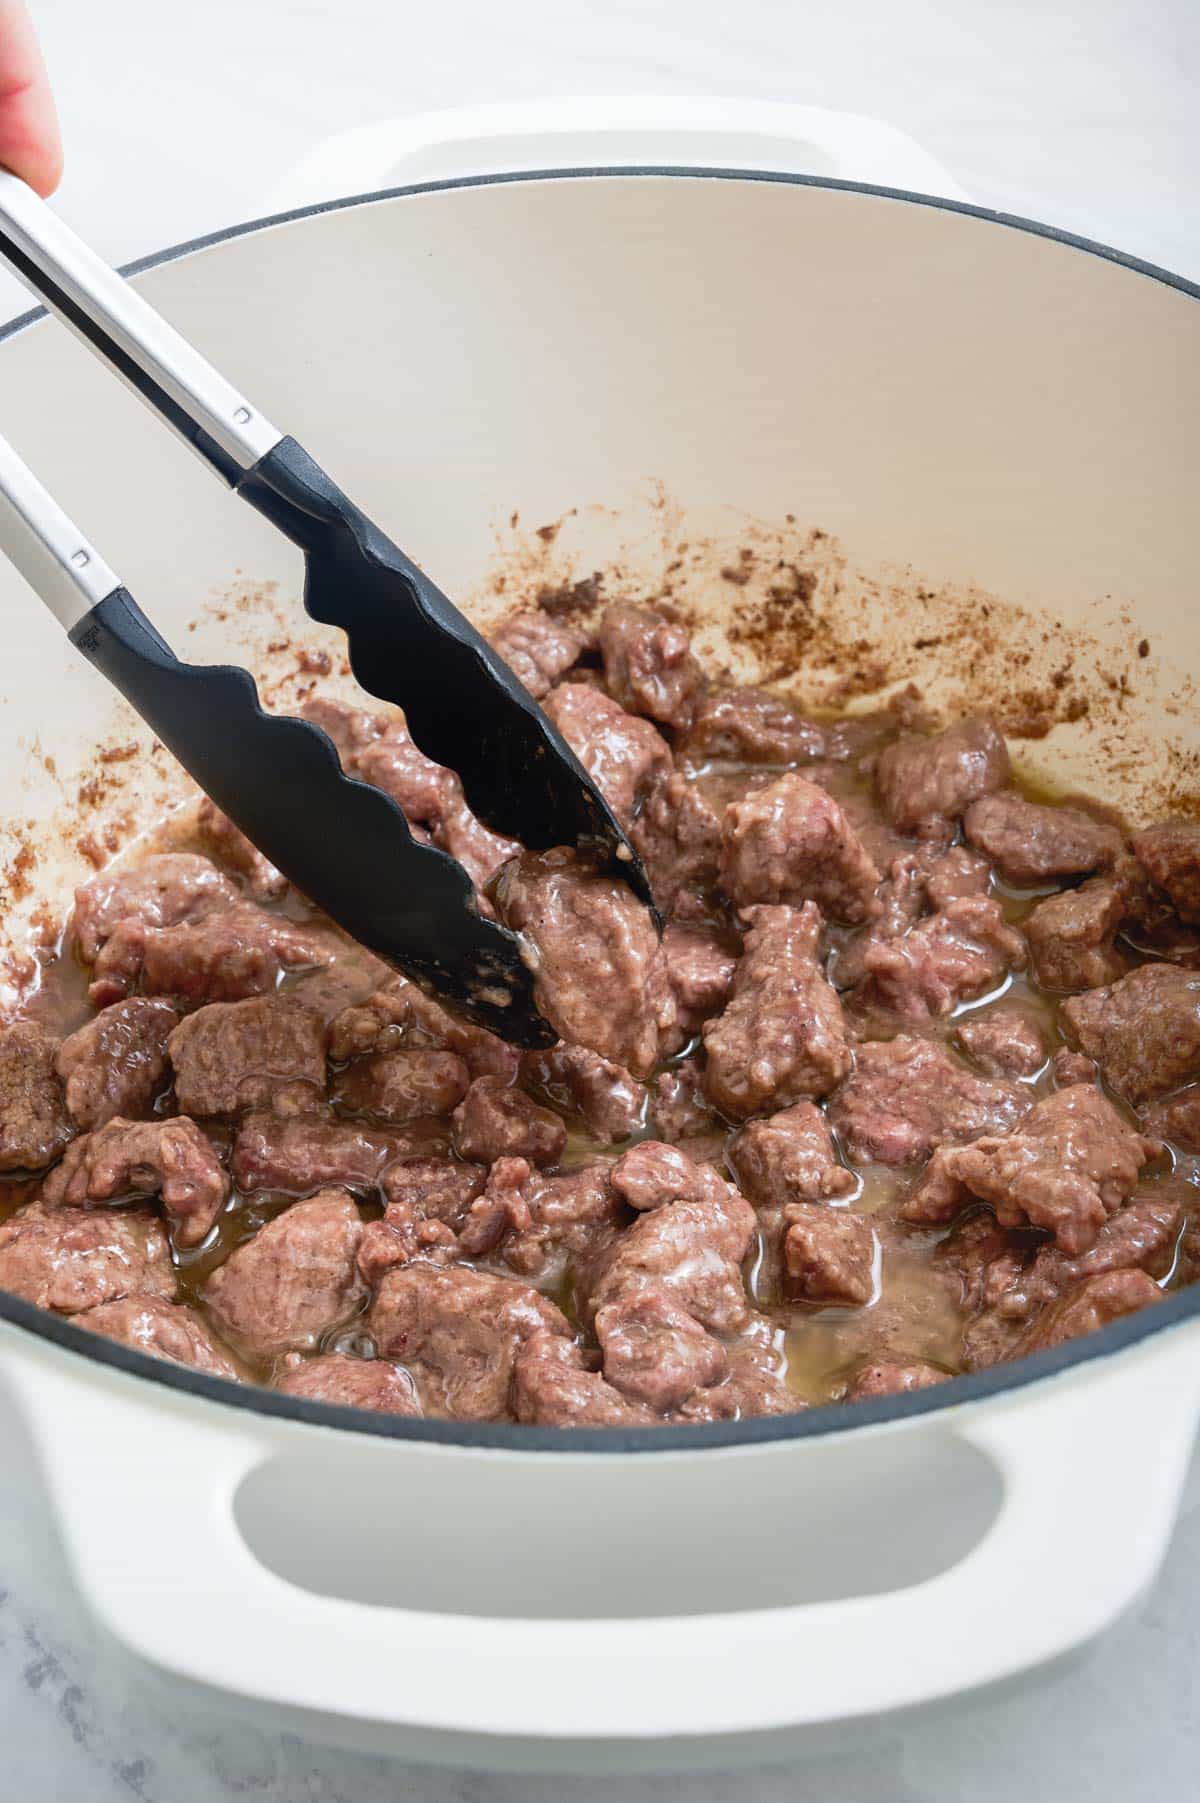 Tongs stir meat that is cooking.